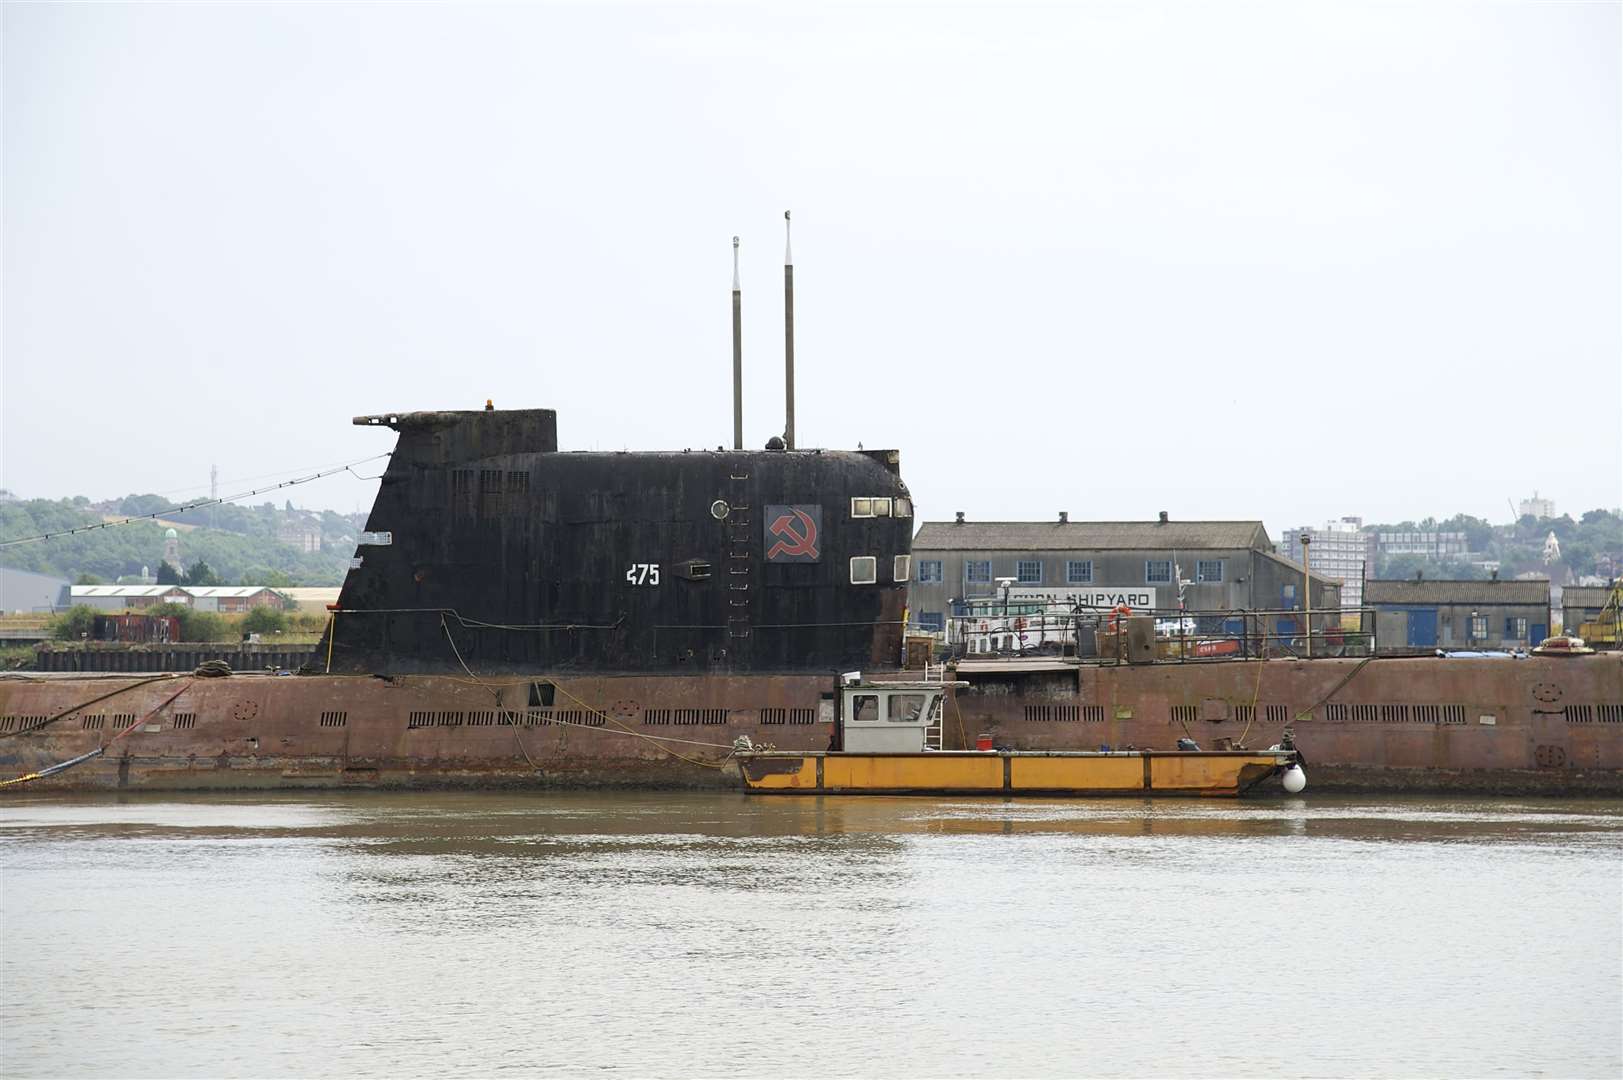 The ex-Soviet Union submarine on the River Medway